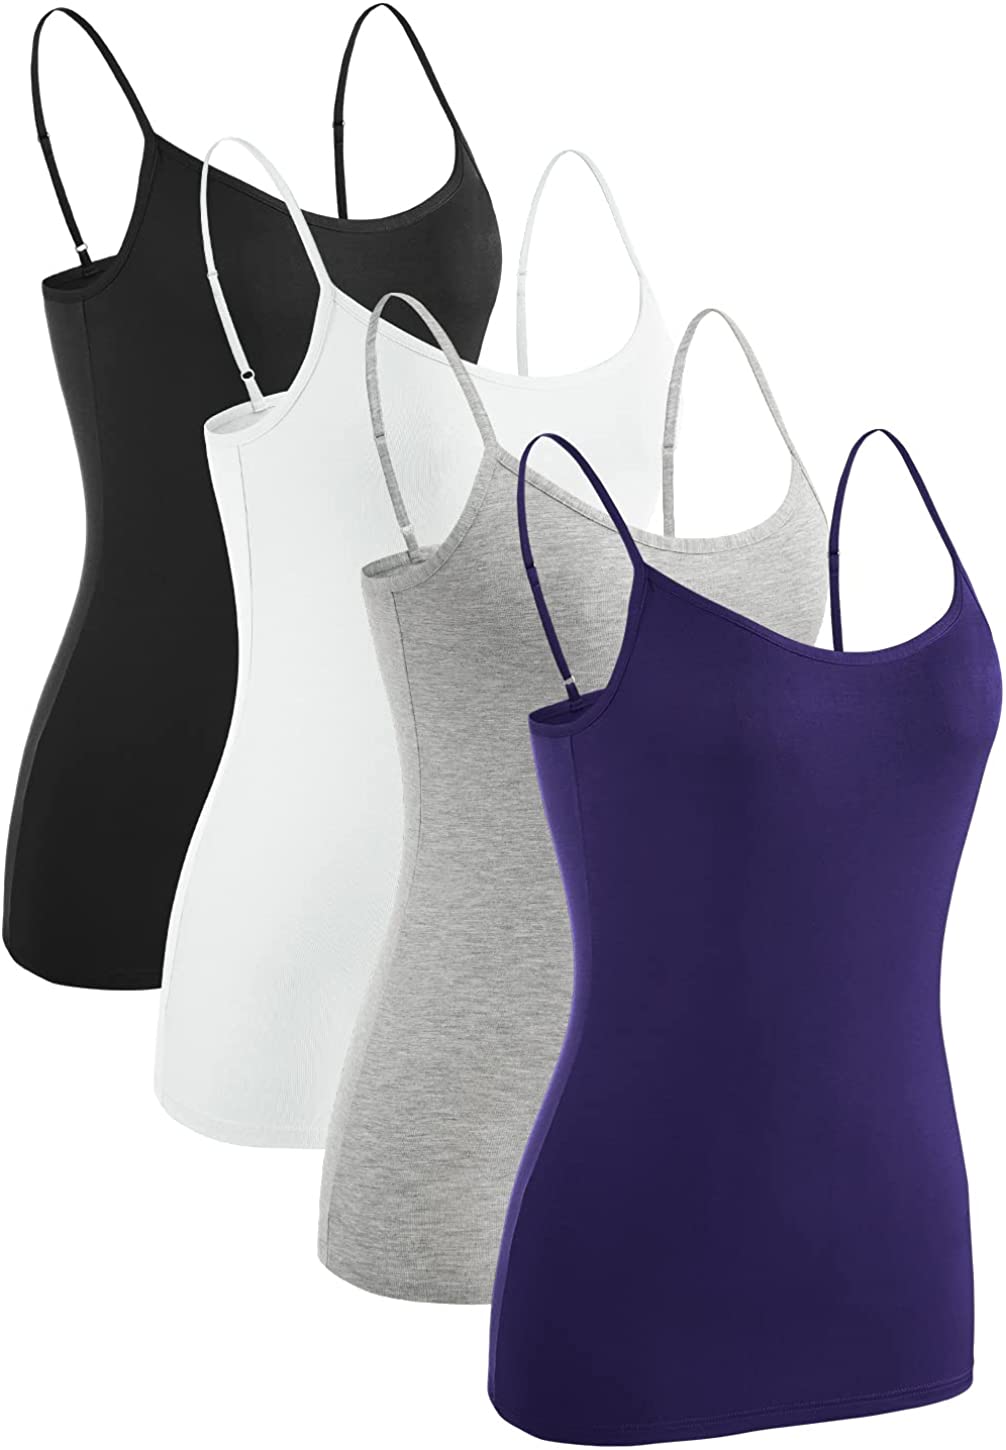 ROSYLINE Basic Cami Tank Tops for Women Undershirts Camisole with